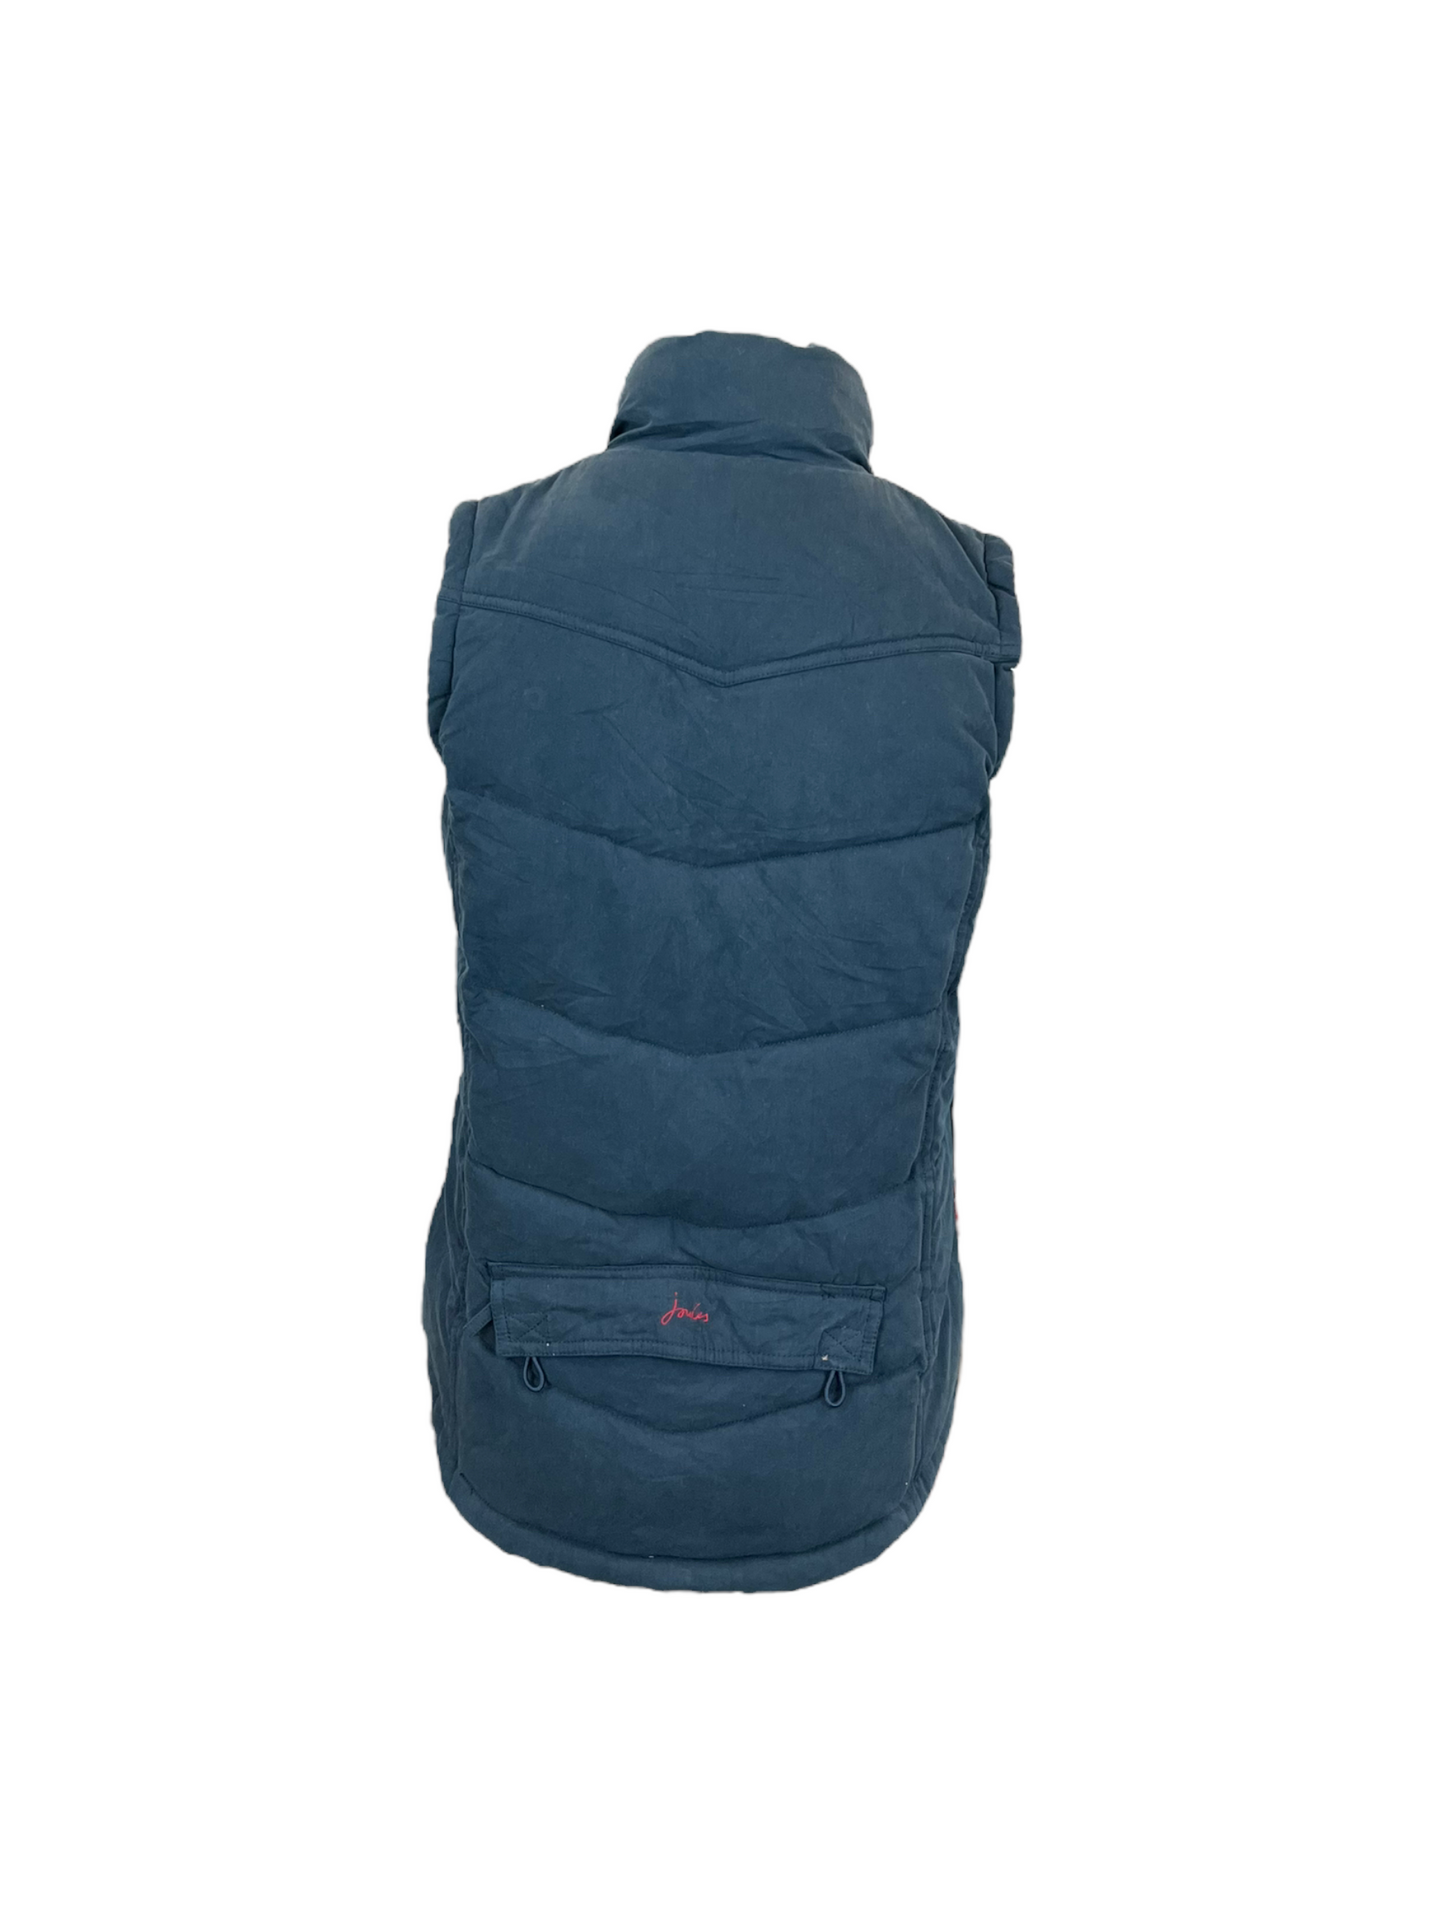 Womens Joules Gilet - M